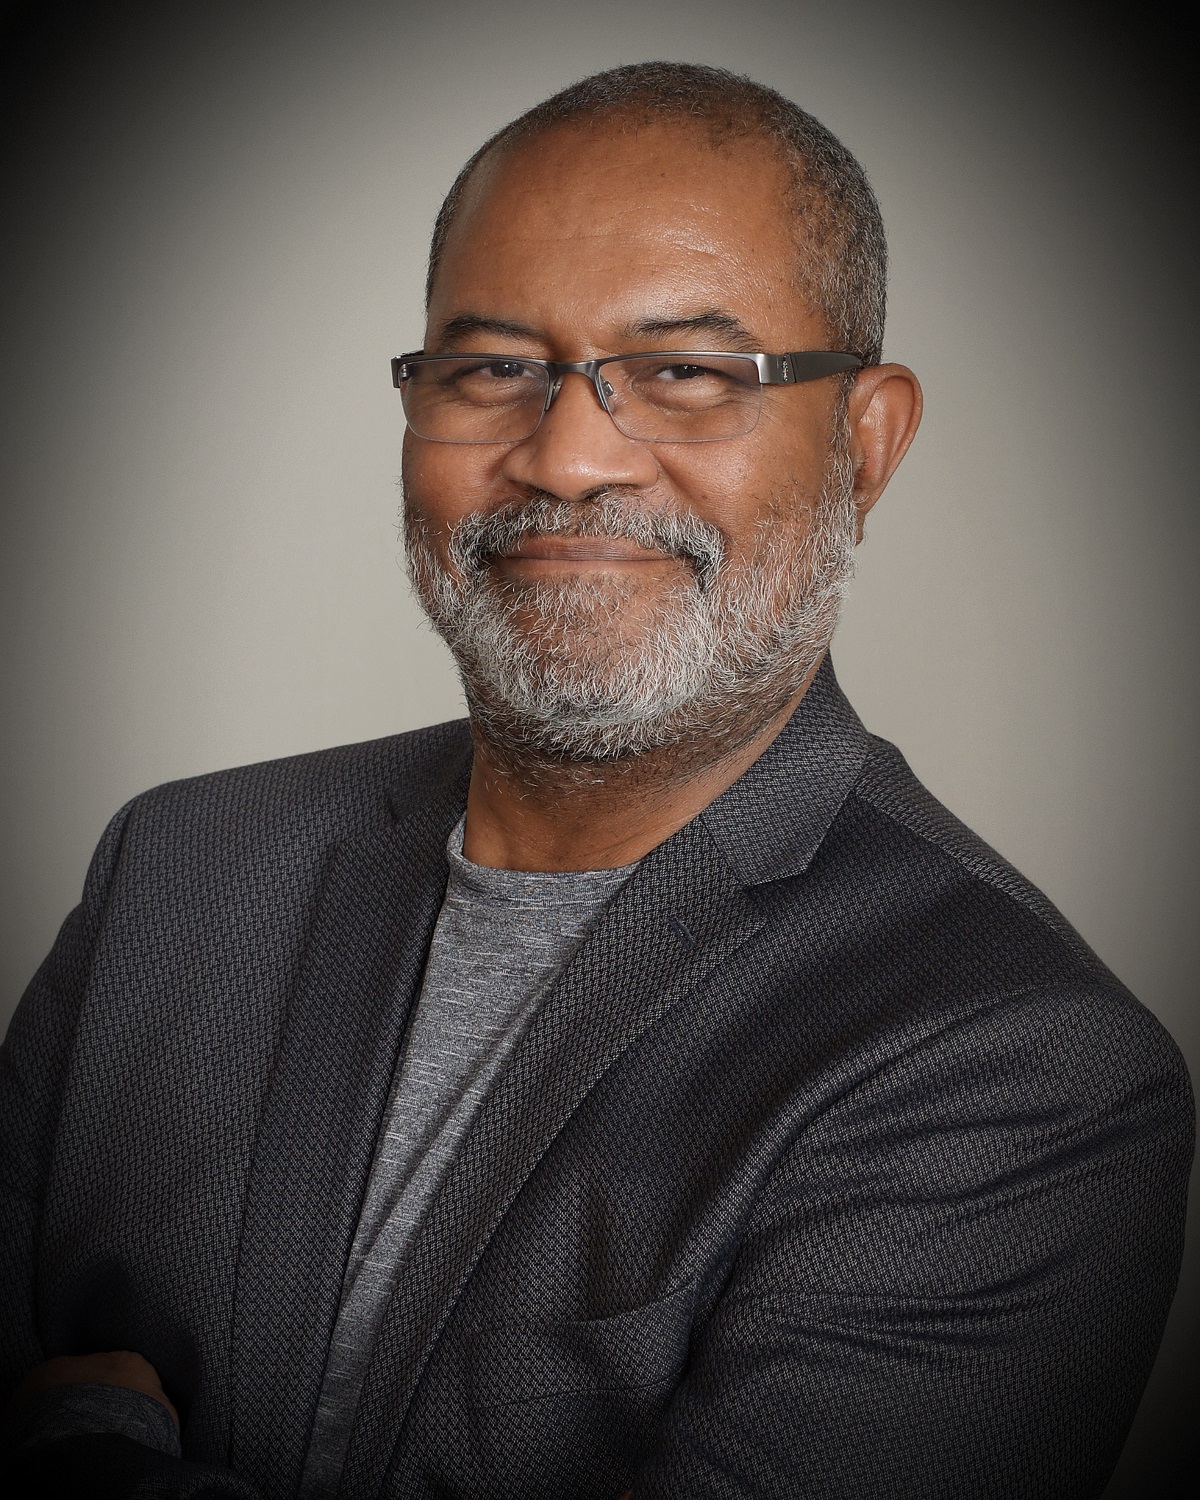 UPC Nebraska presents an exclusive virtual session with Ron Stallworth, former undercover police officer and author of Black Klansman: A Memoir on November 11, 2020 at 7:30 p.m. via Zoom.